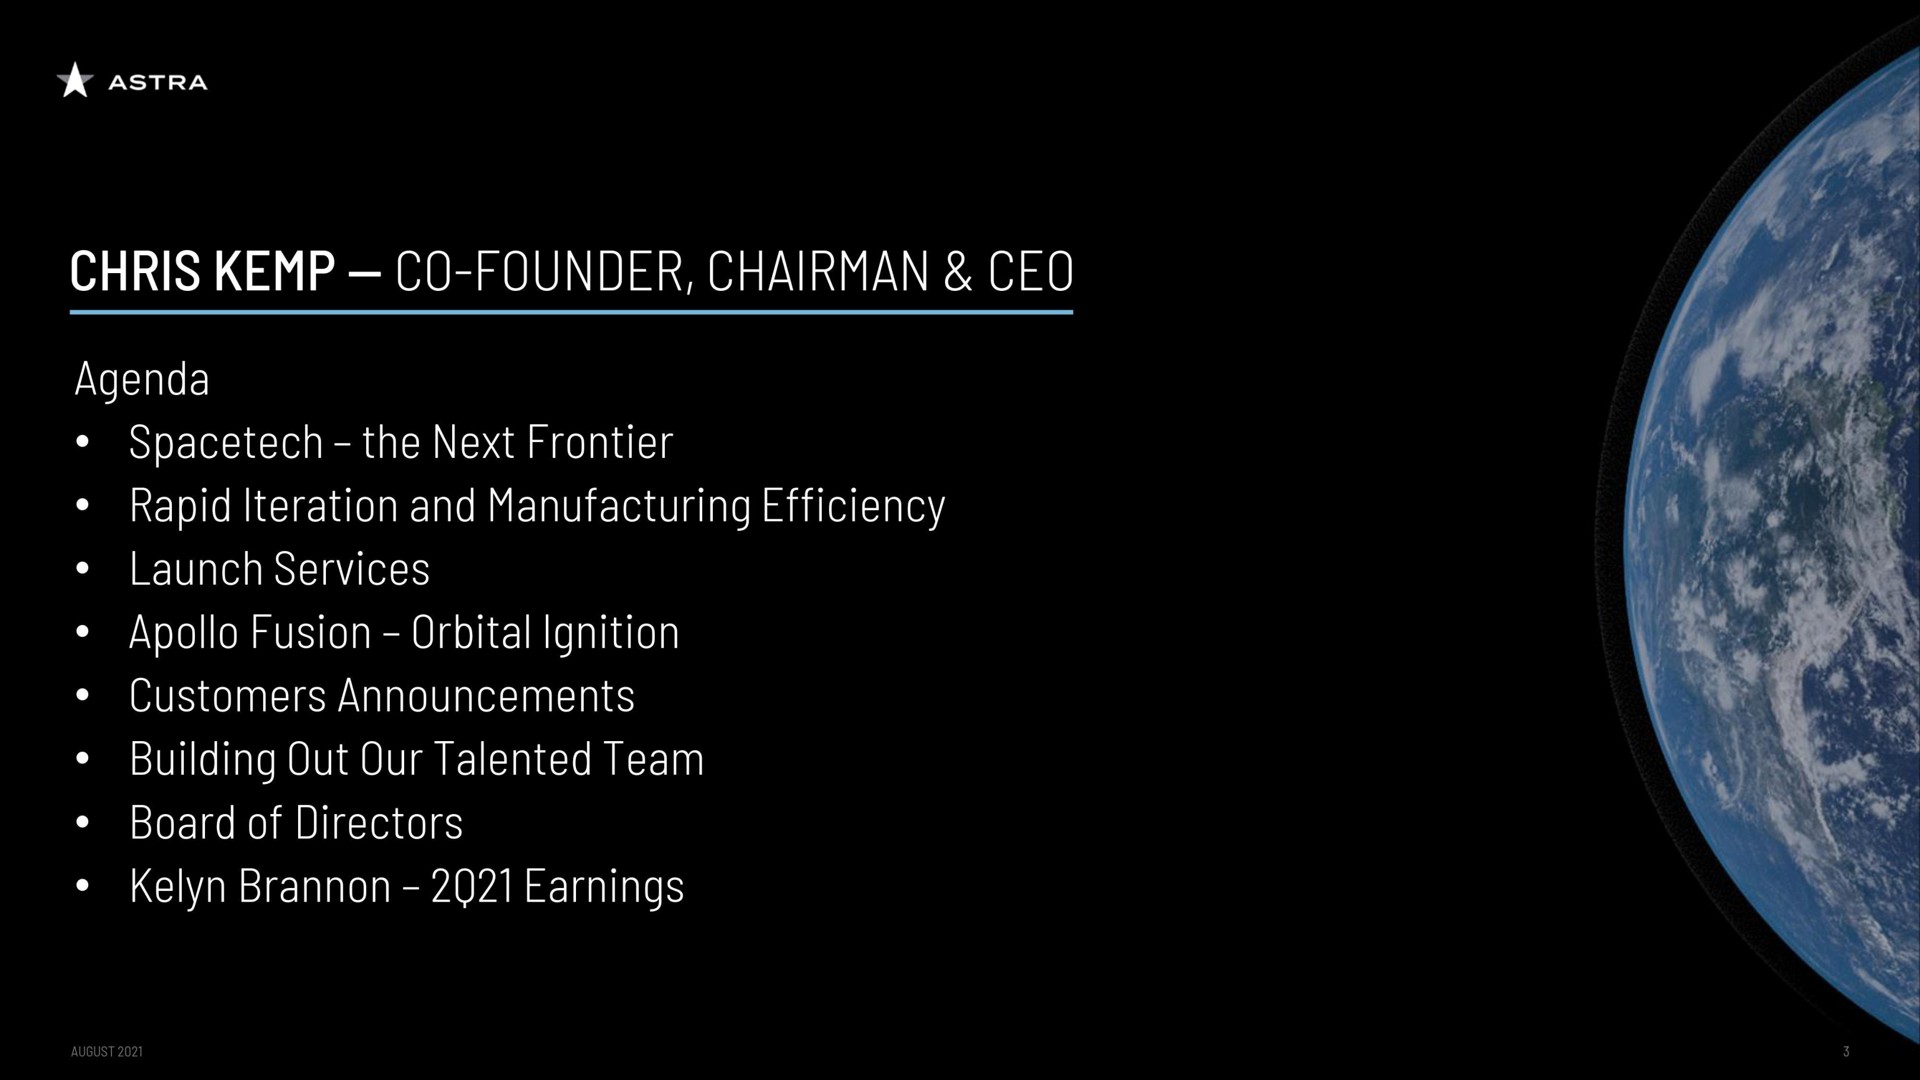 kemp founder chairman agenda the next frontier rapid iteration and manufacturing efficiency launch services fusion orbital ignition customers announcements building out our talented team board of directors earnings | Astra